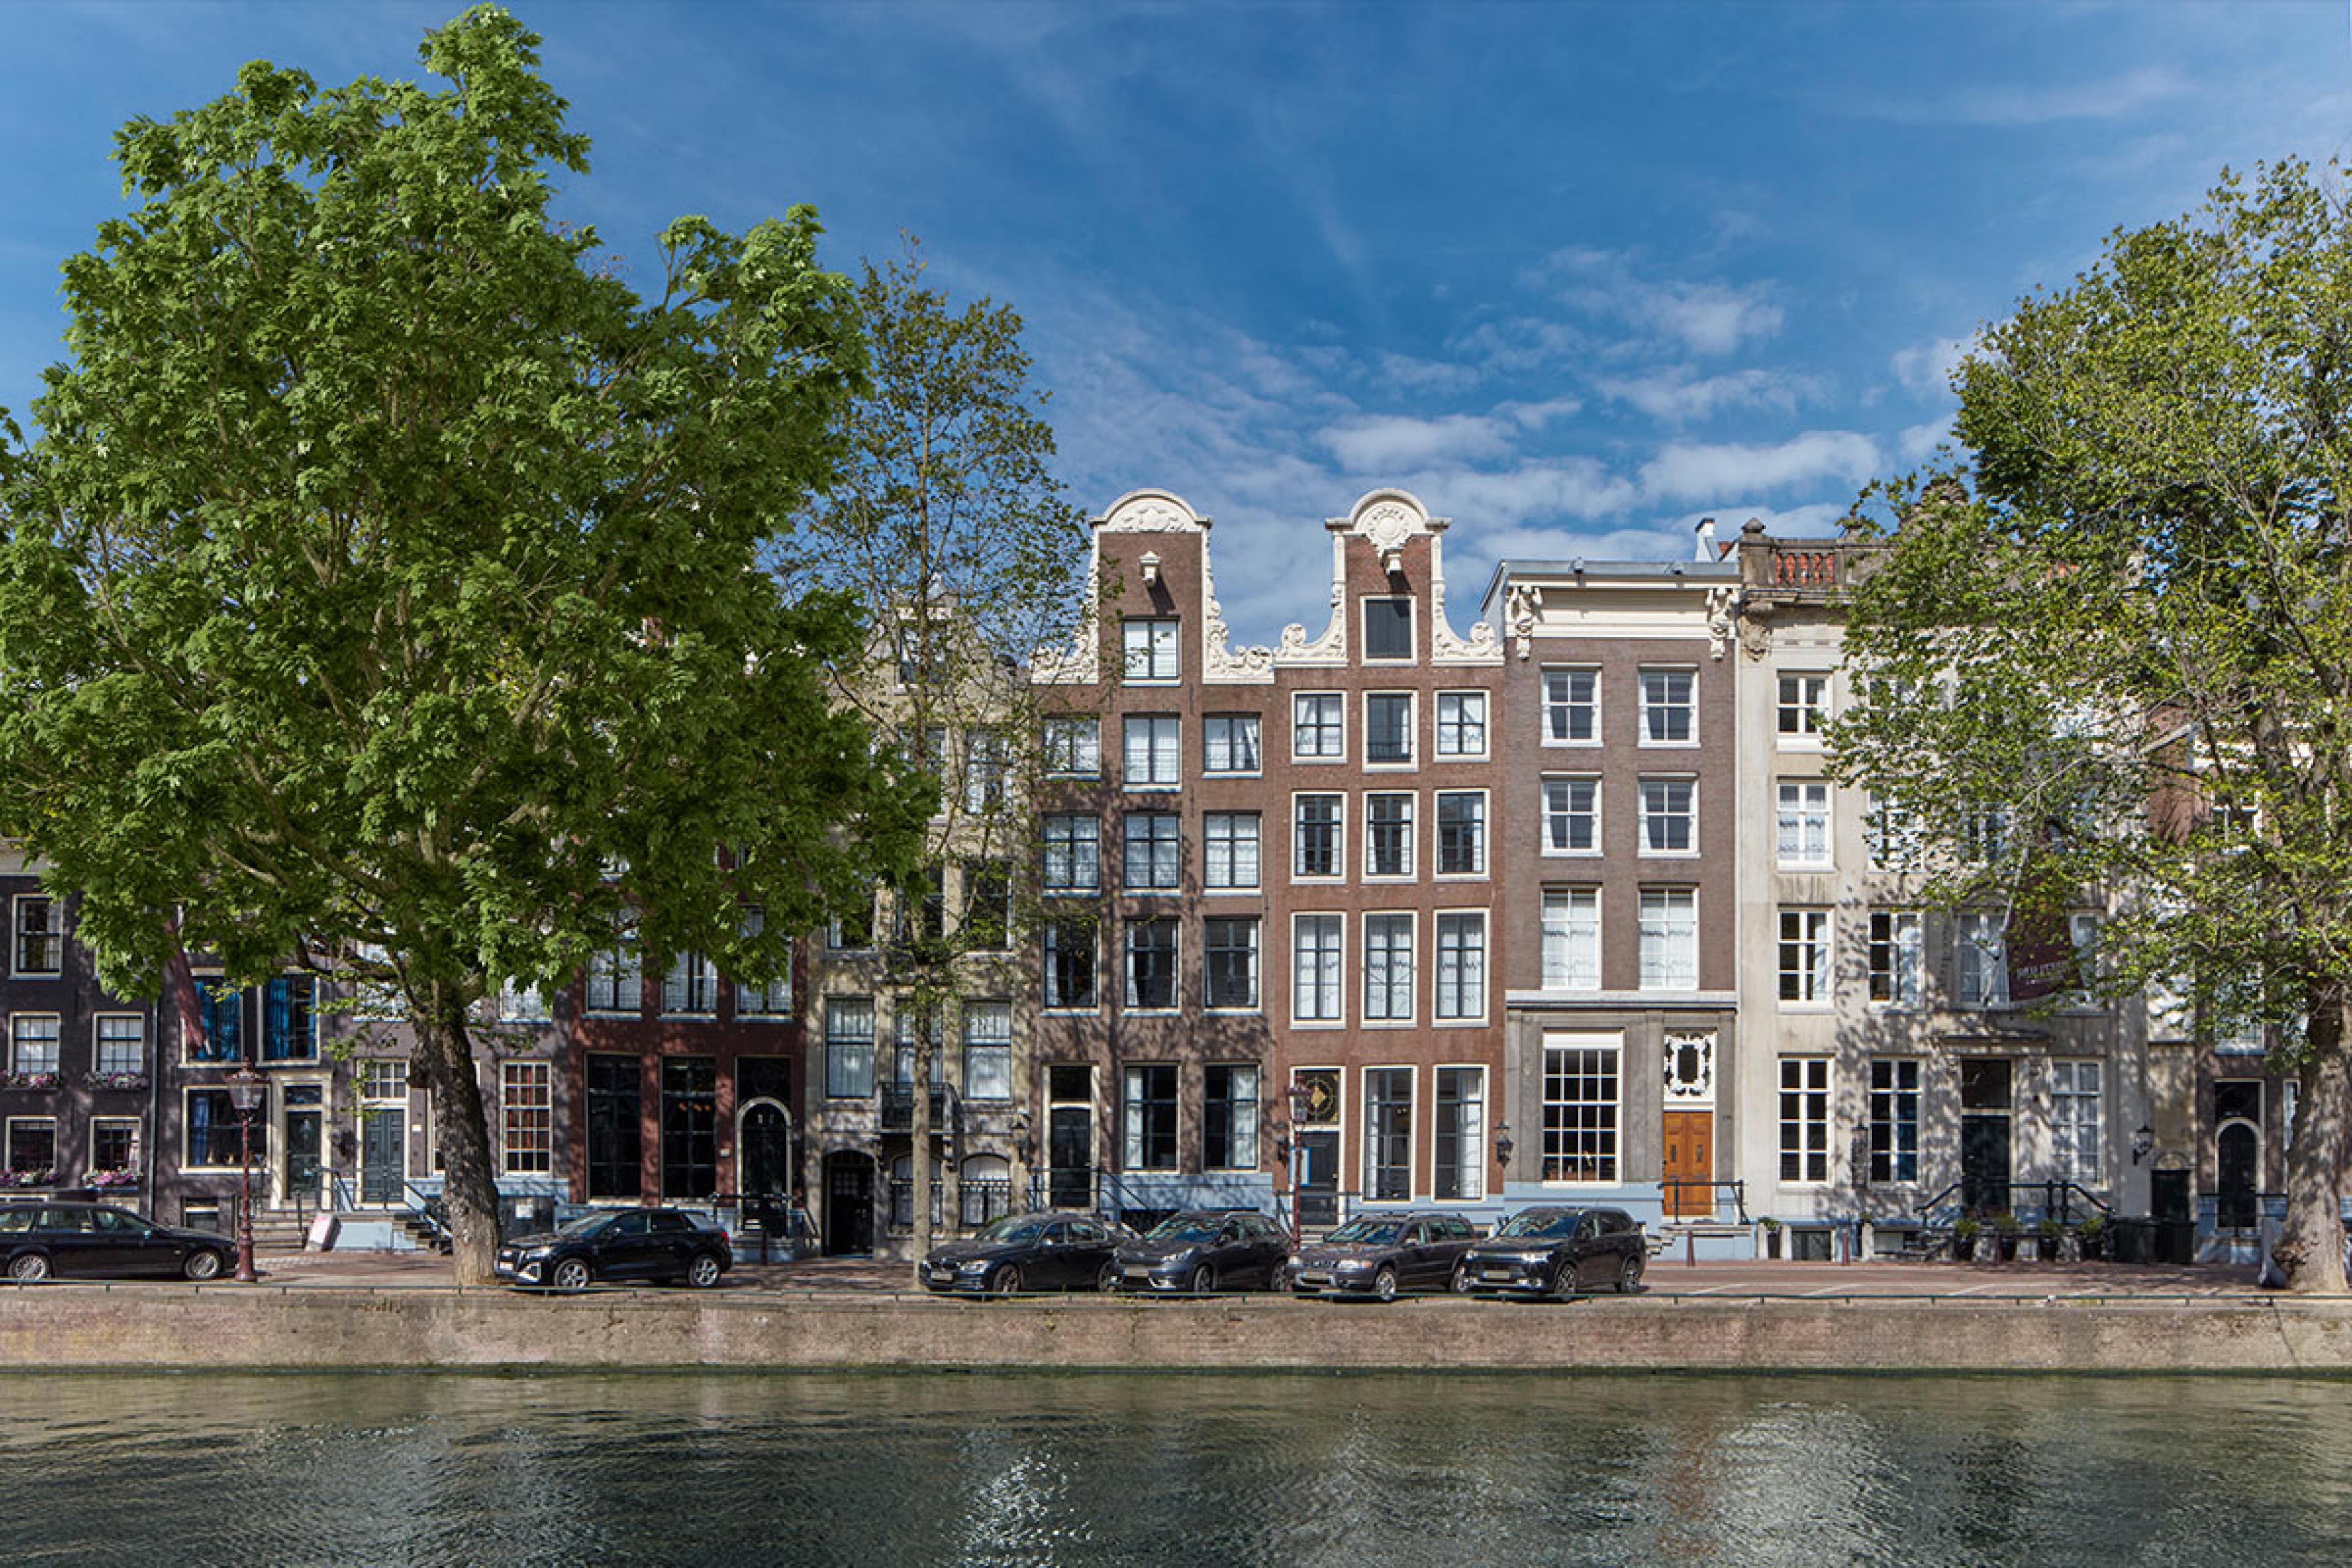 rowhouses in amsterdam along canal